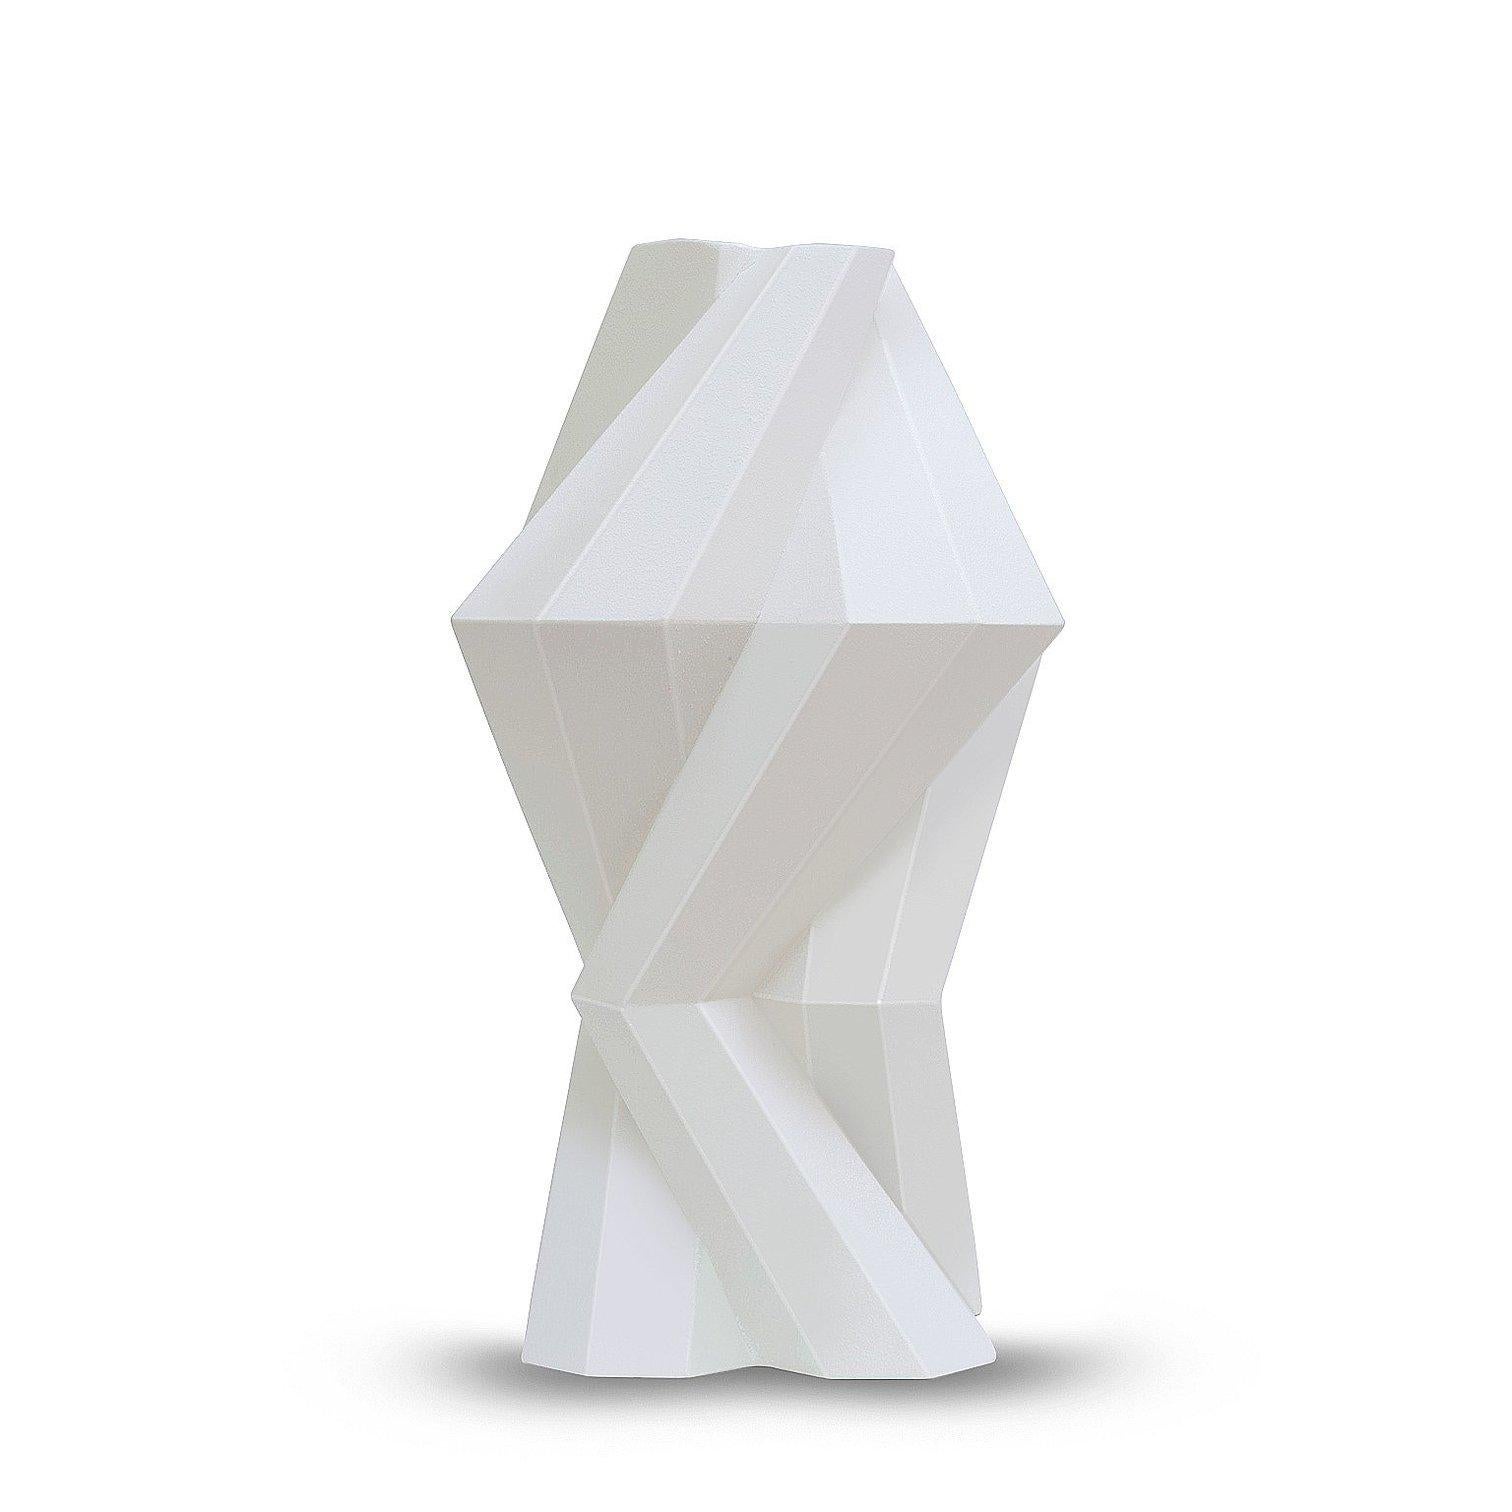 Designer Lara Bohinc explores the marriage of ancient and futuristic form in the new fortress vase range, which has created a more complex geometric and modern structure from the original inspiration of the octagonal towers at the Diocletian Palace